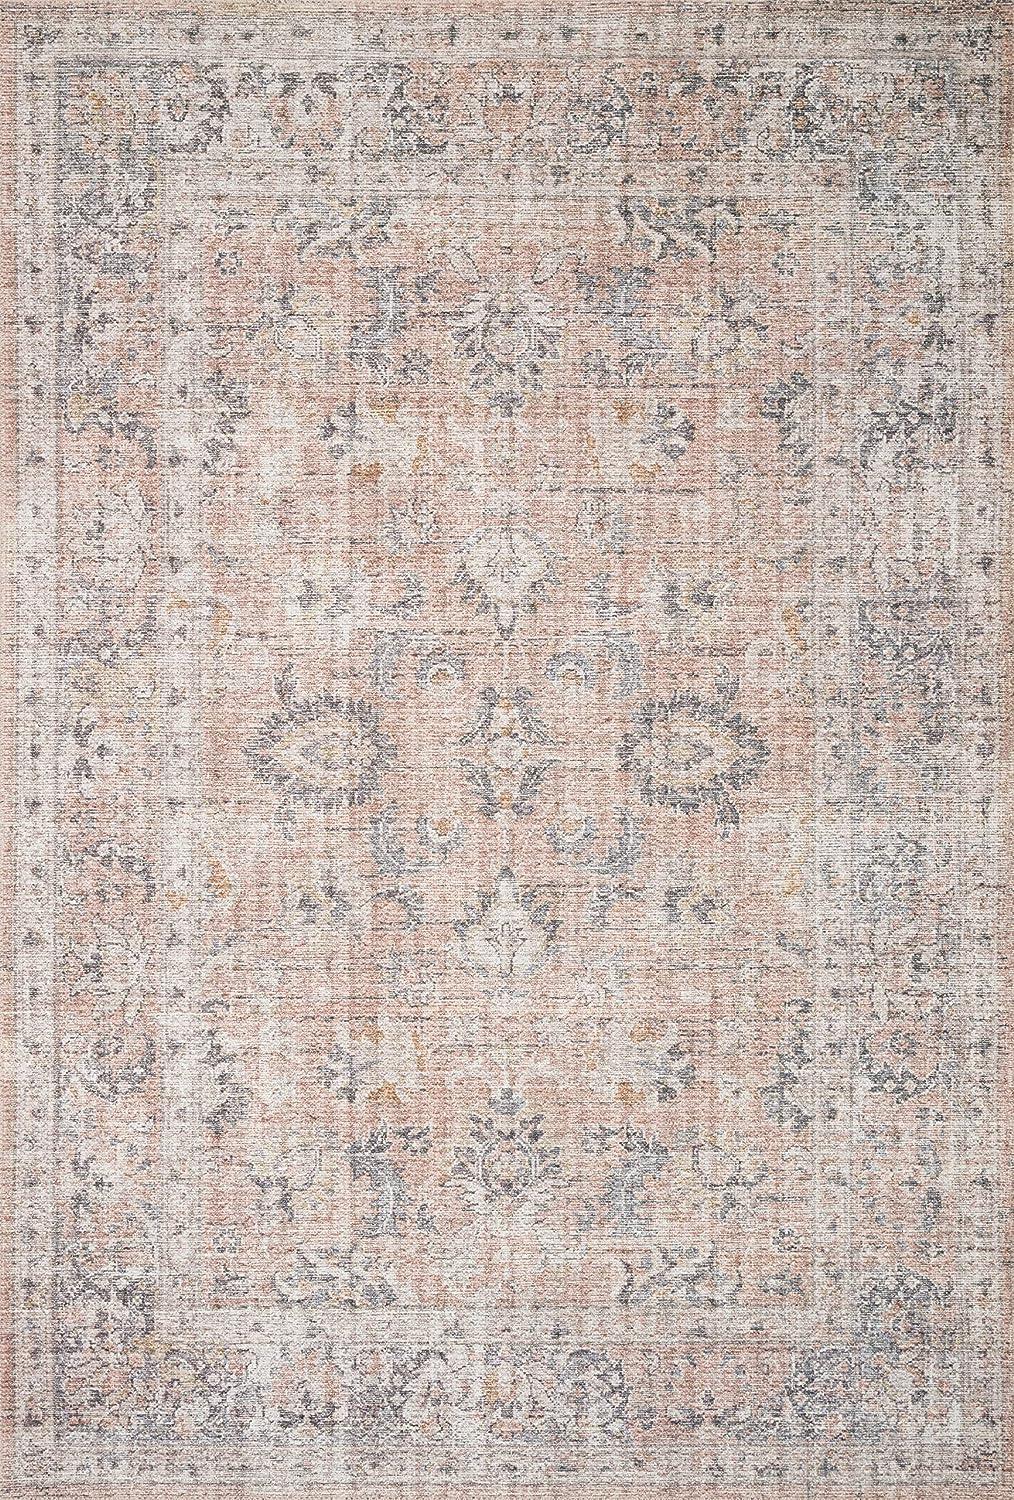 ‎Blush / Grey ‎Traditional ‎Stain-resistant ‎Living Room ‎Area Rug